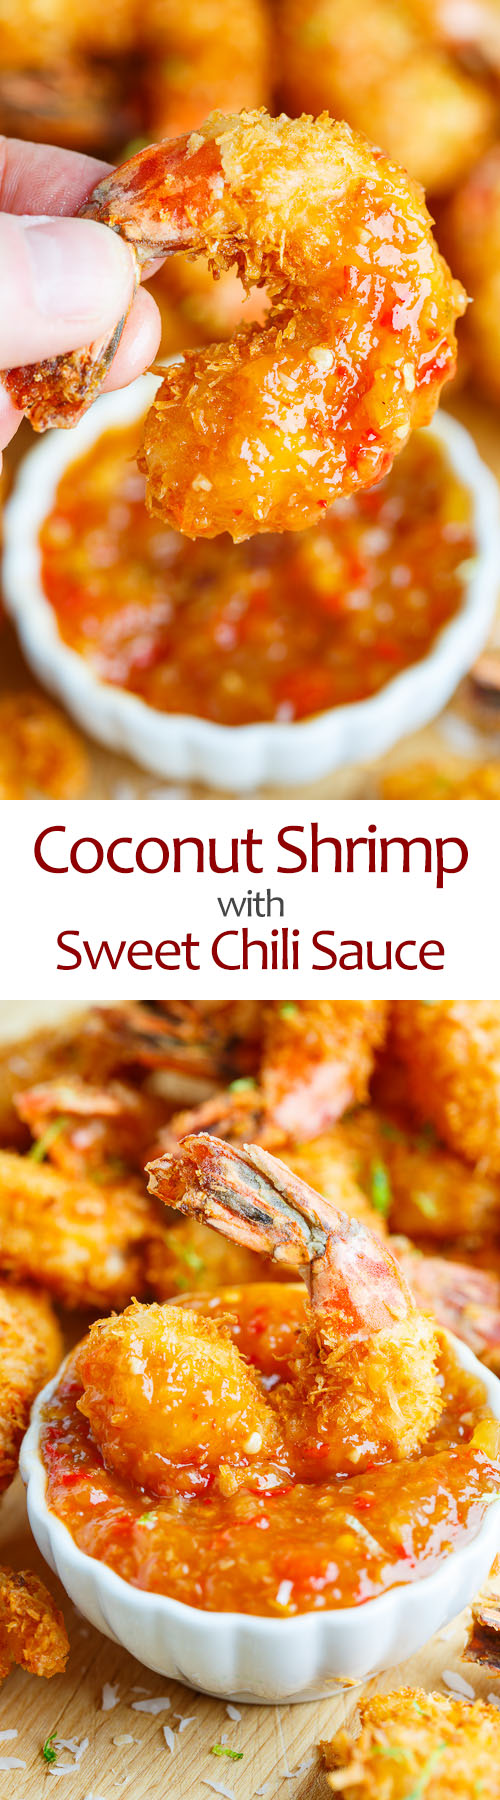 Coconut Shrimp with Sweet Chili Sauce on Closet Cooking